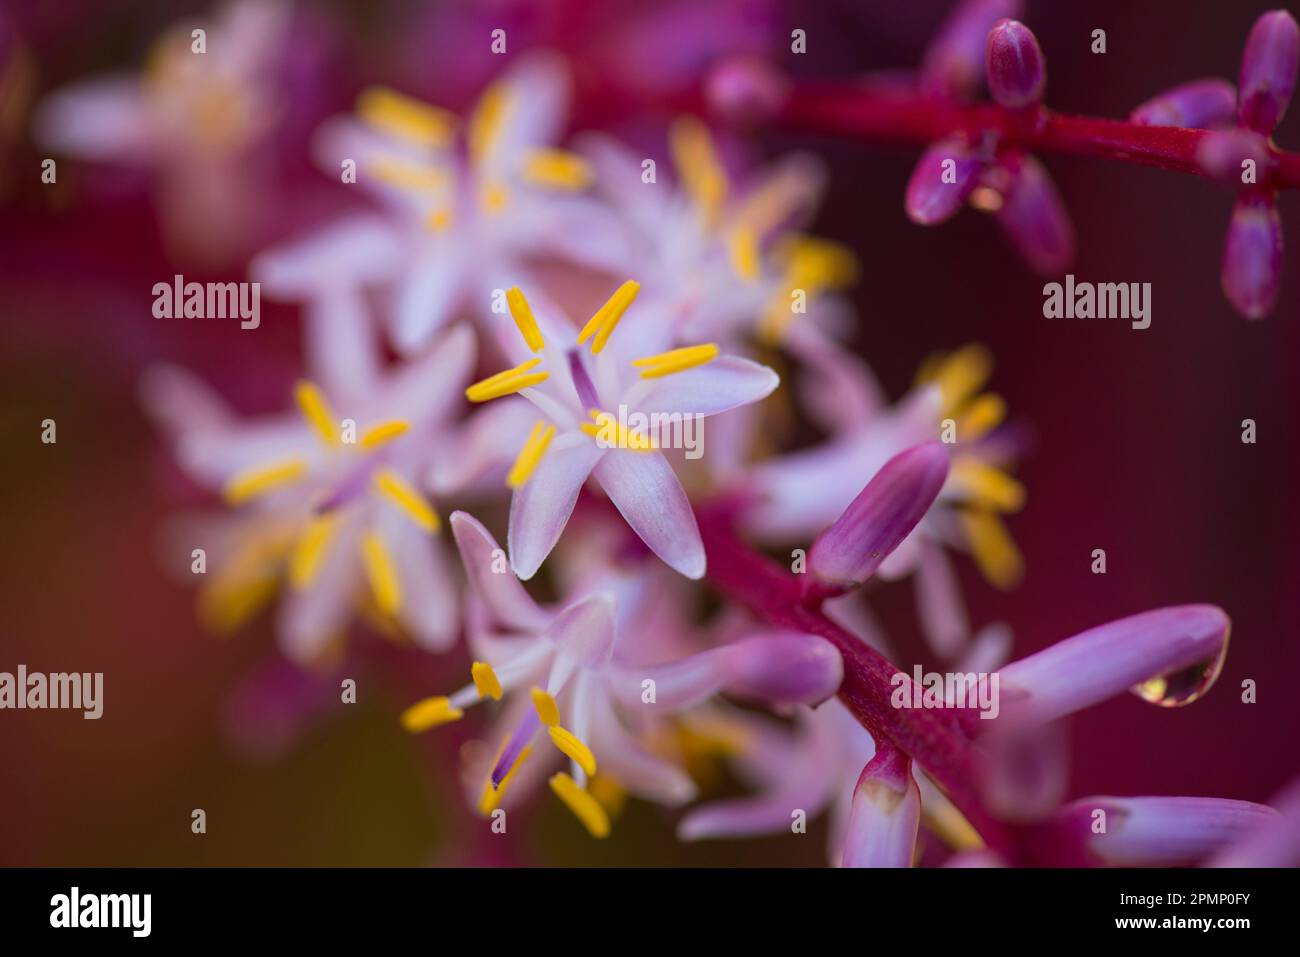 Detail of flowers of Cordyline terminalis Kunth; Costa Rica Stock Photo